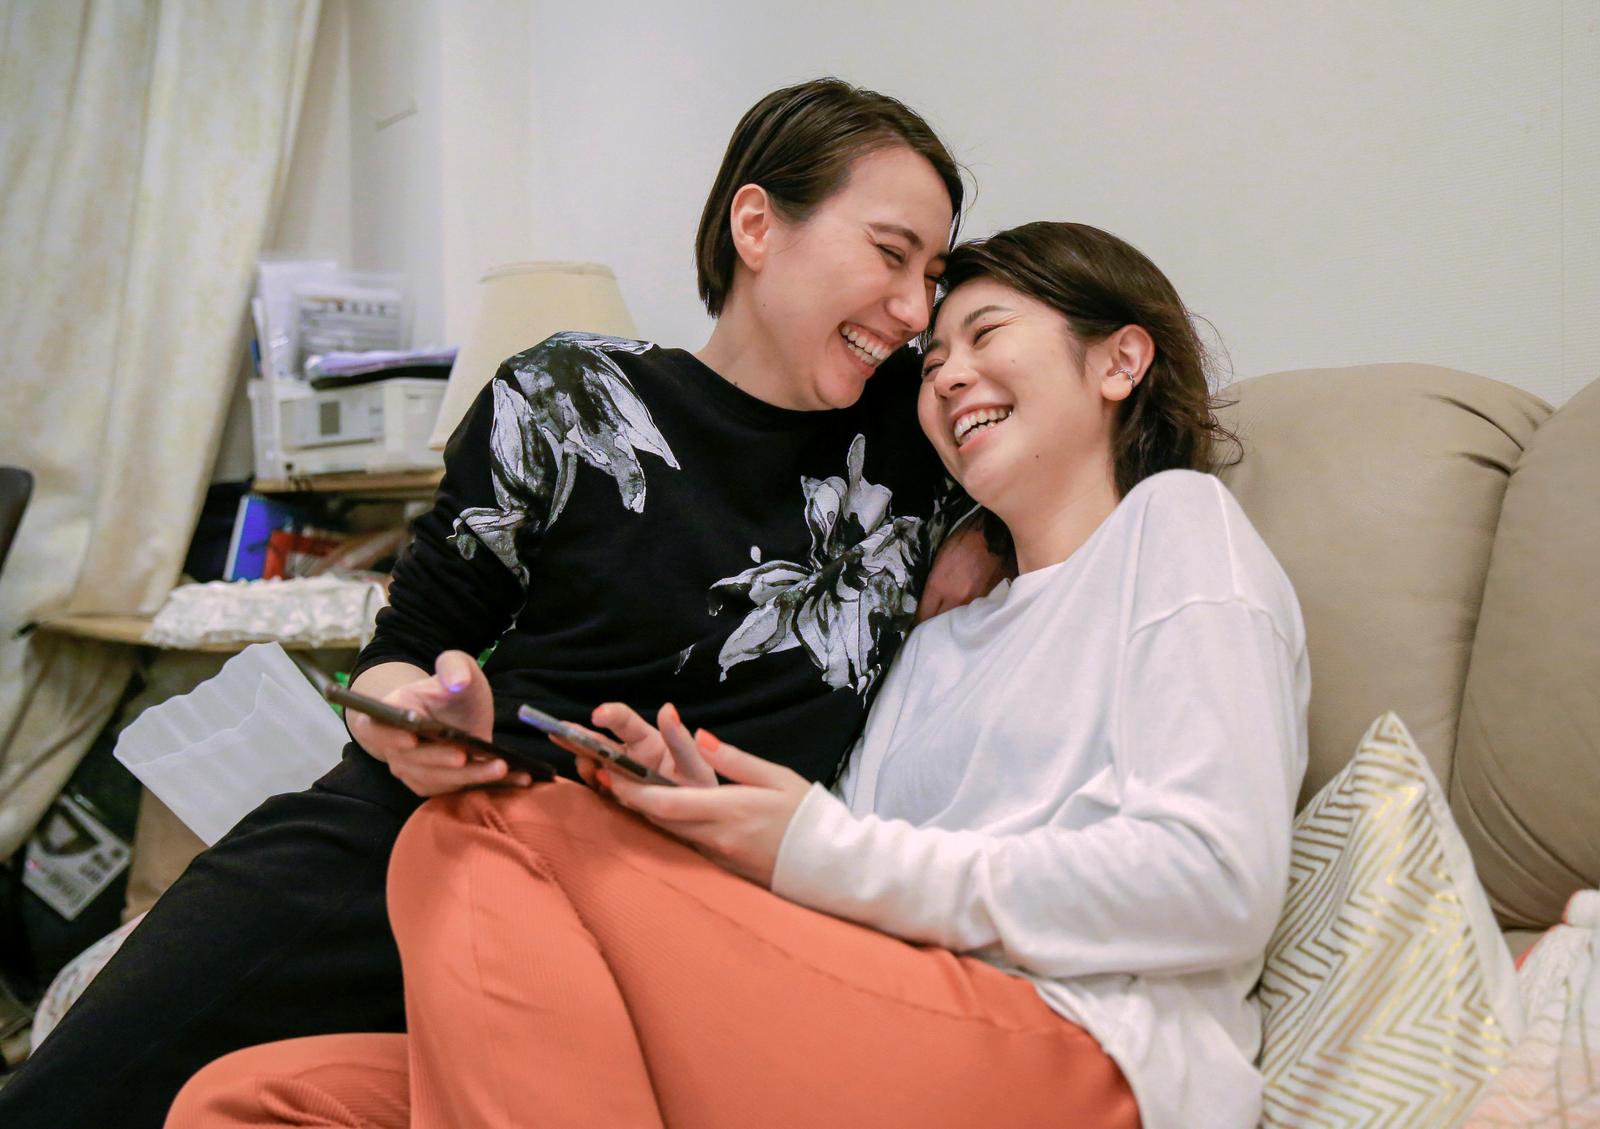 'The light of hope': Japanese same-sex couple overjoyed by marriage ruling